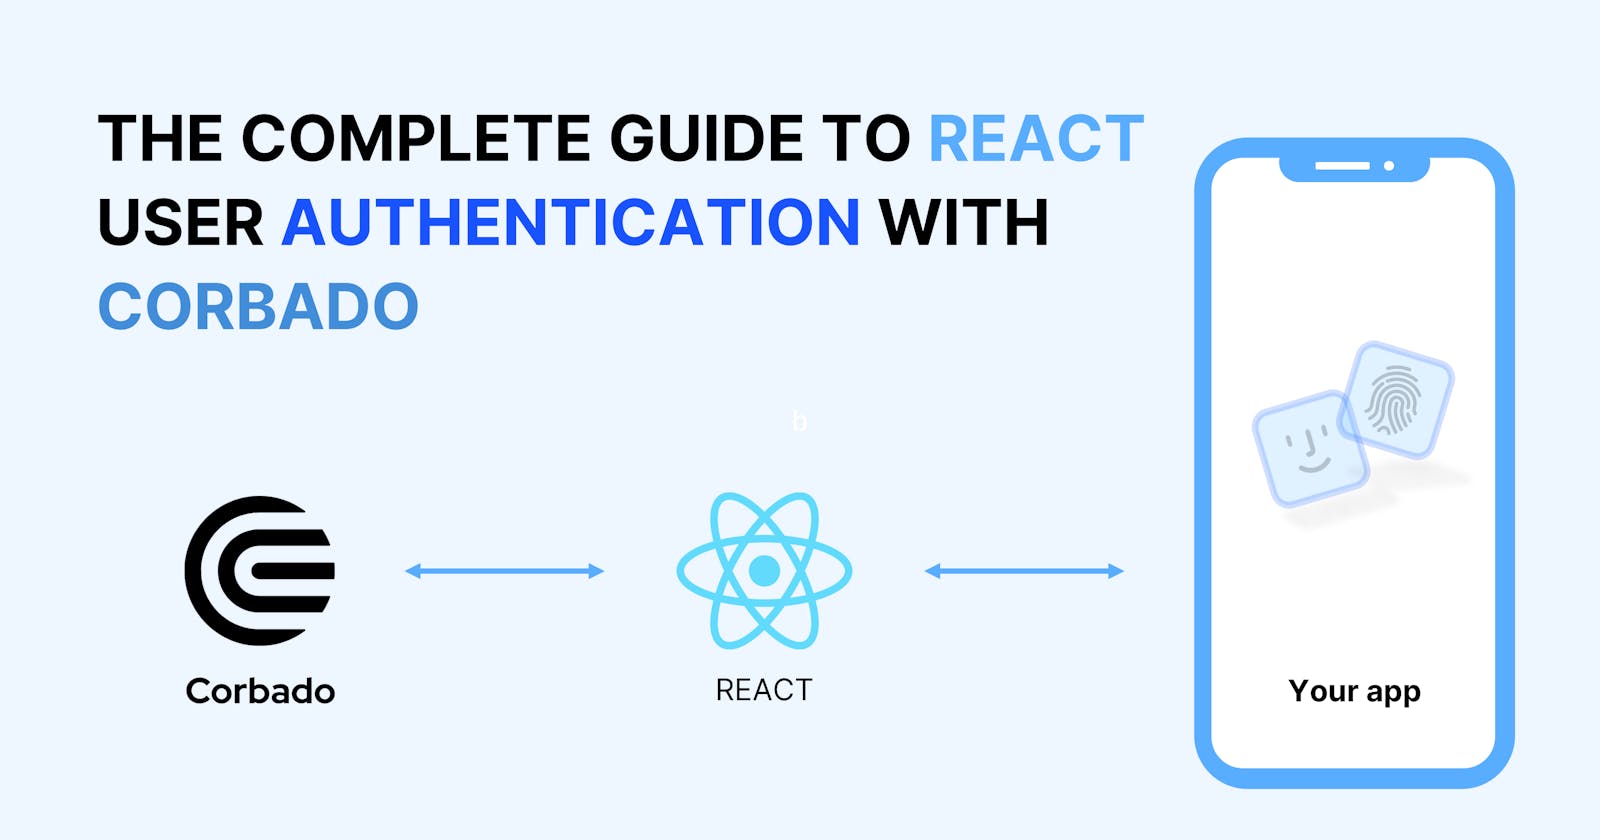 The Complete Guide To React User Authentication With Corbado